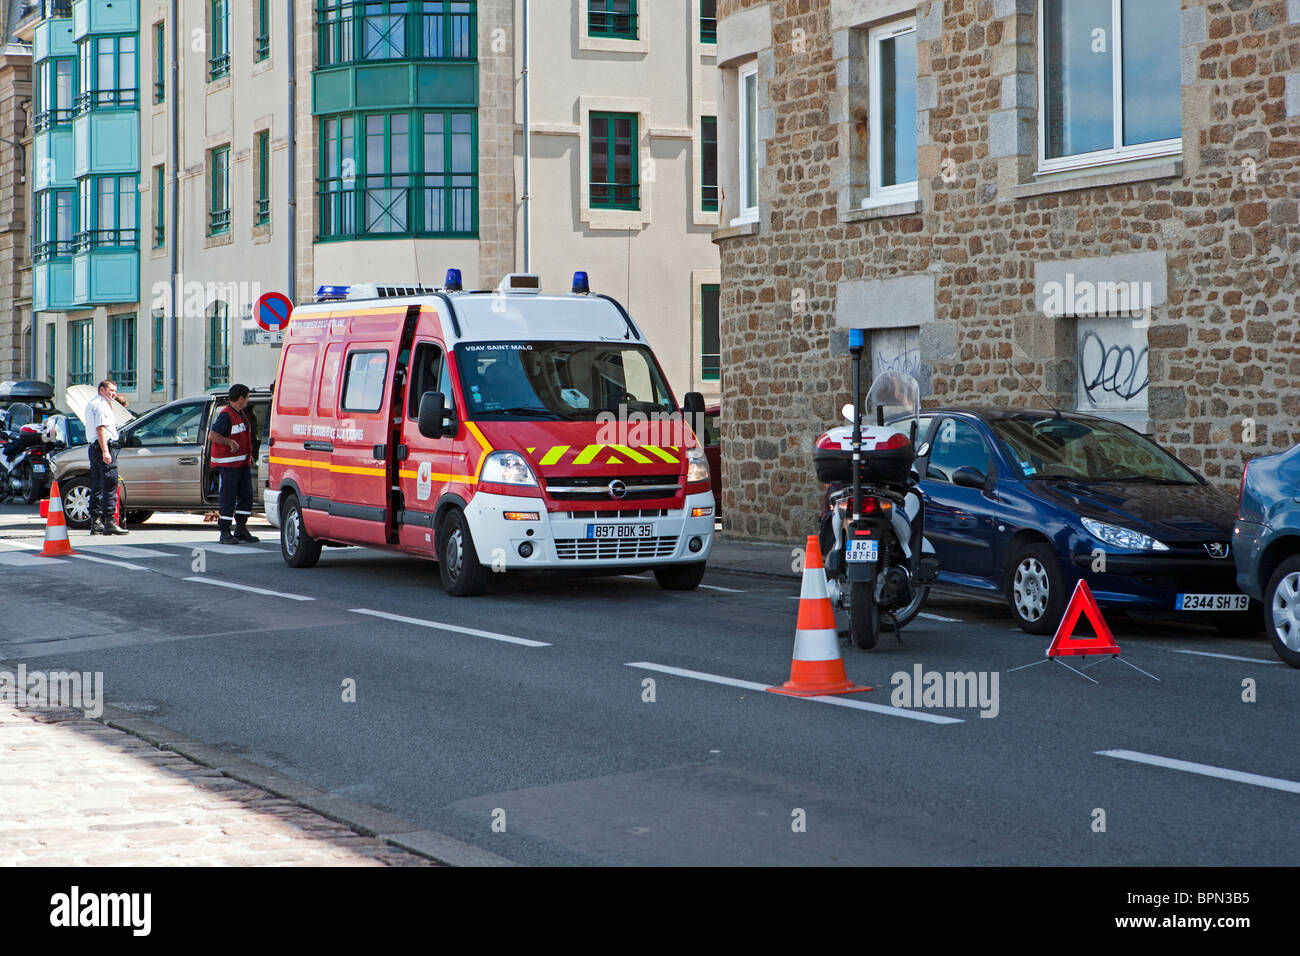 Emergency Services attending road accident Stock Photo